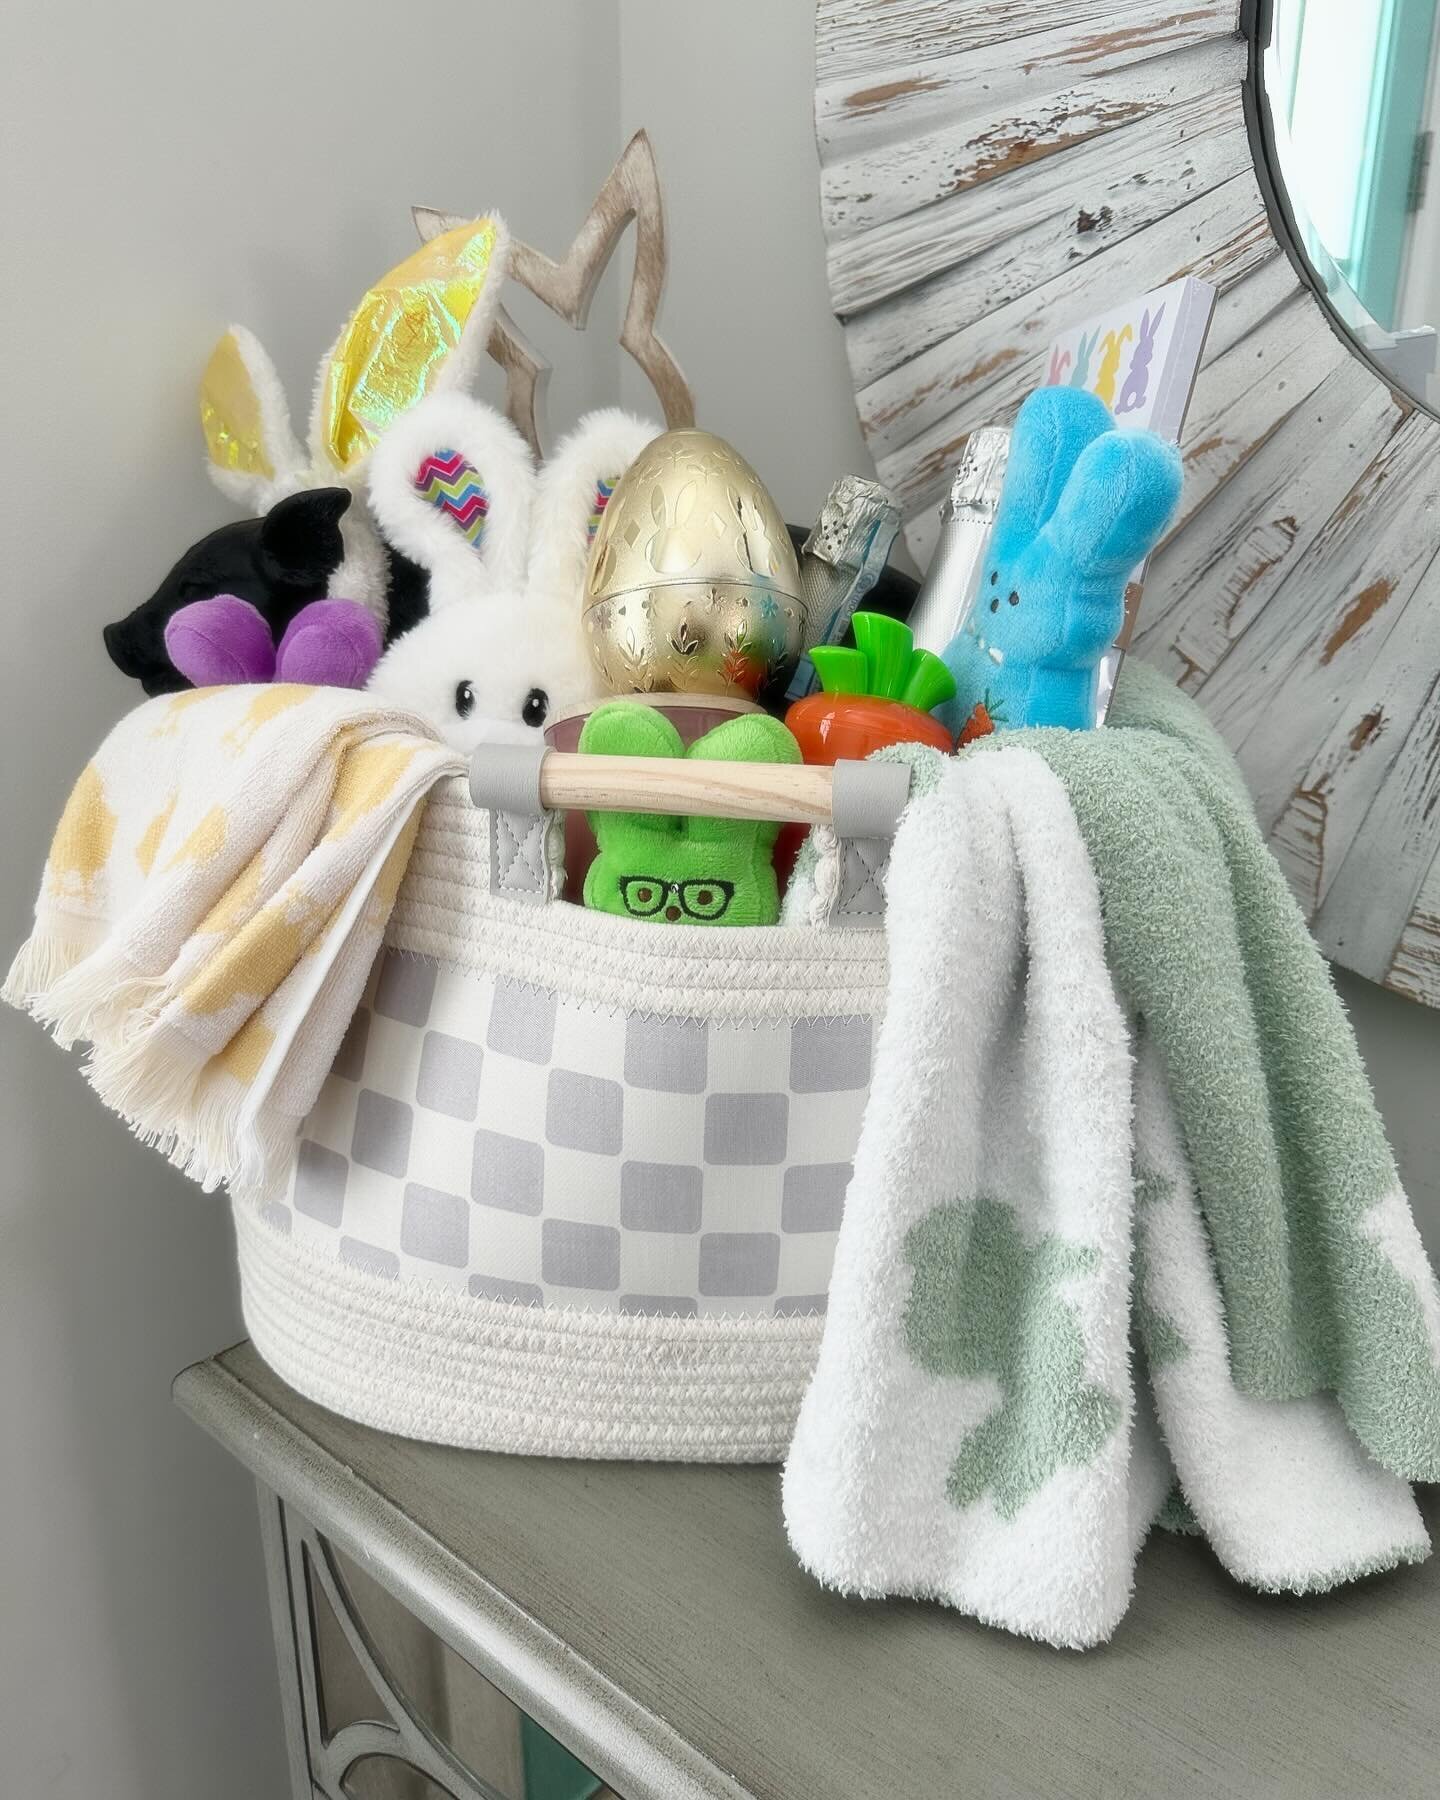 🌷🐣Say Hello to Spring with&hellip;..🐣🌷

🐰 OUR EASTER EGG-STRAVAGANZA RAFFLE BASKET 🐰 

We will be raffling this basket off on this weekend! It has lots of goodies, including some surprise gift cards in the GOLDEN EGG!!! 🏆🥚 

Basket Includes:
